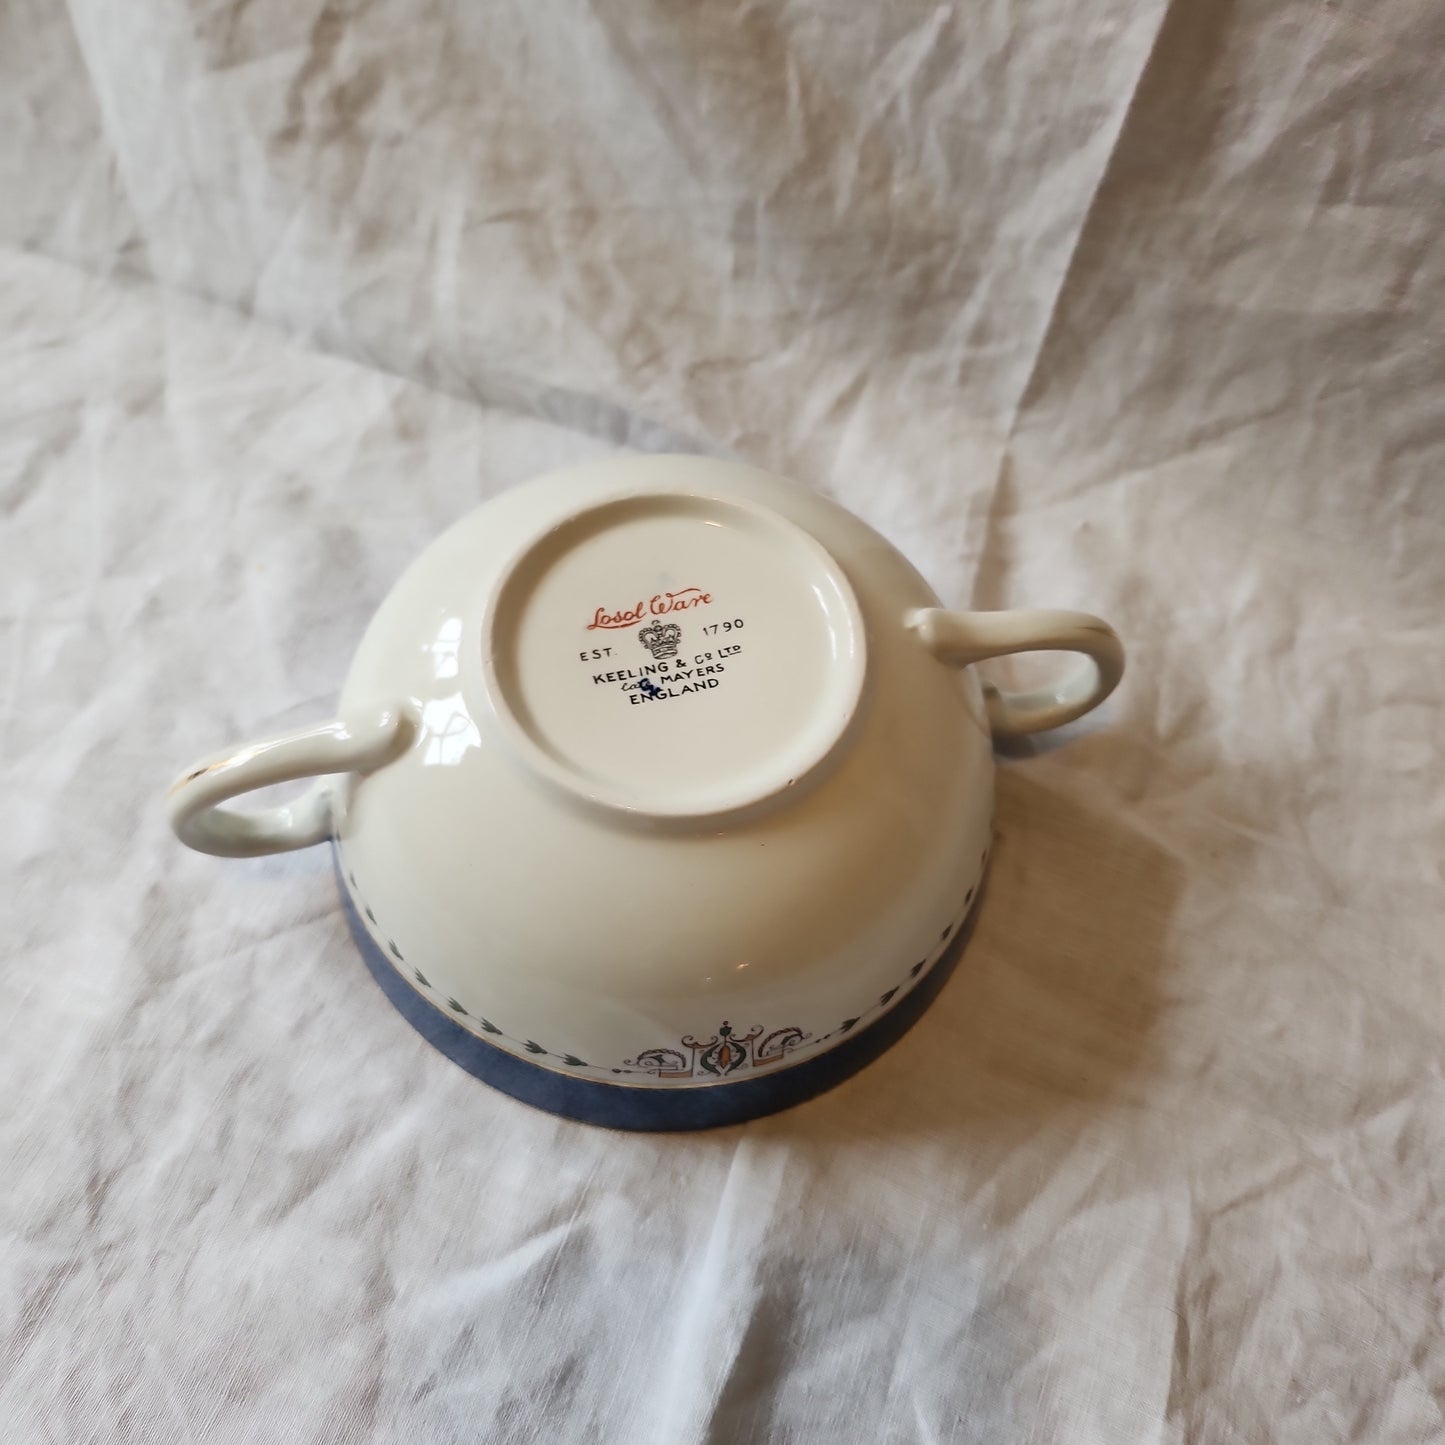 Kneeling and Co soup bowl with handle